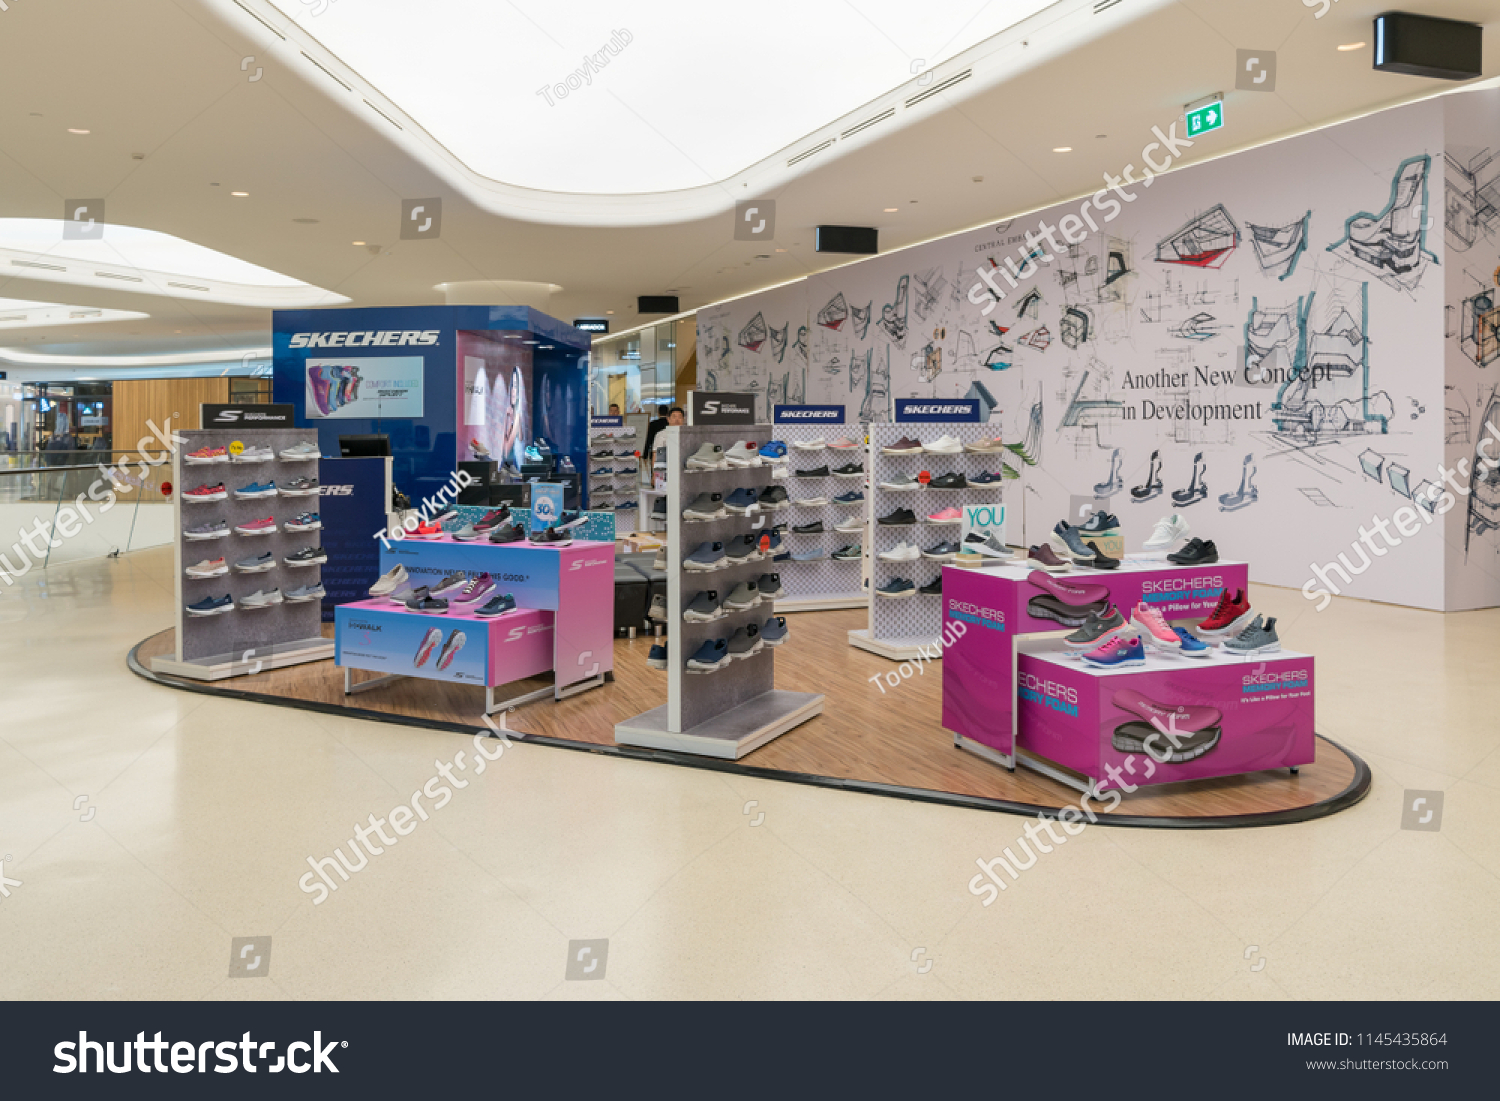 skechers shoes factory outlet